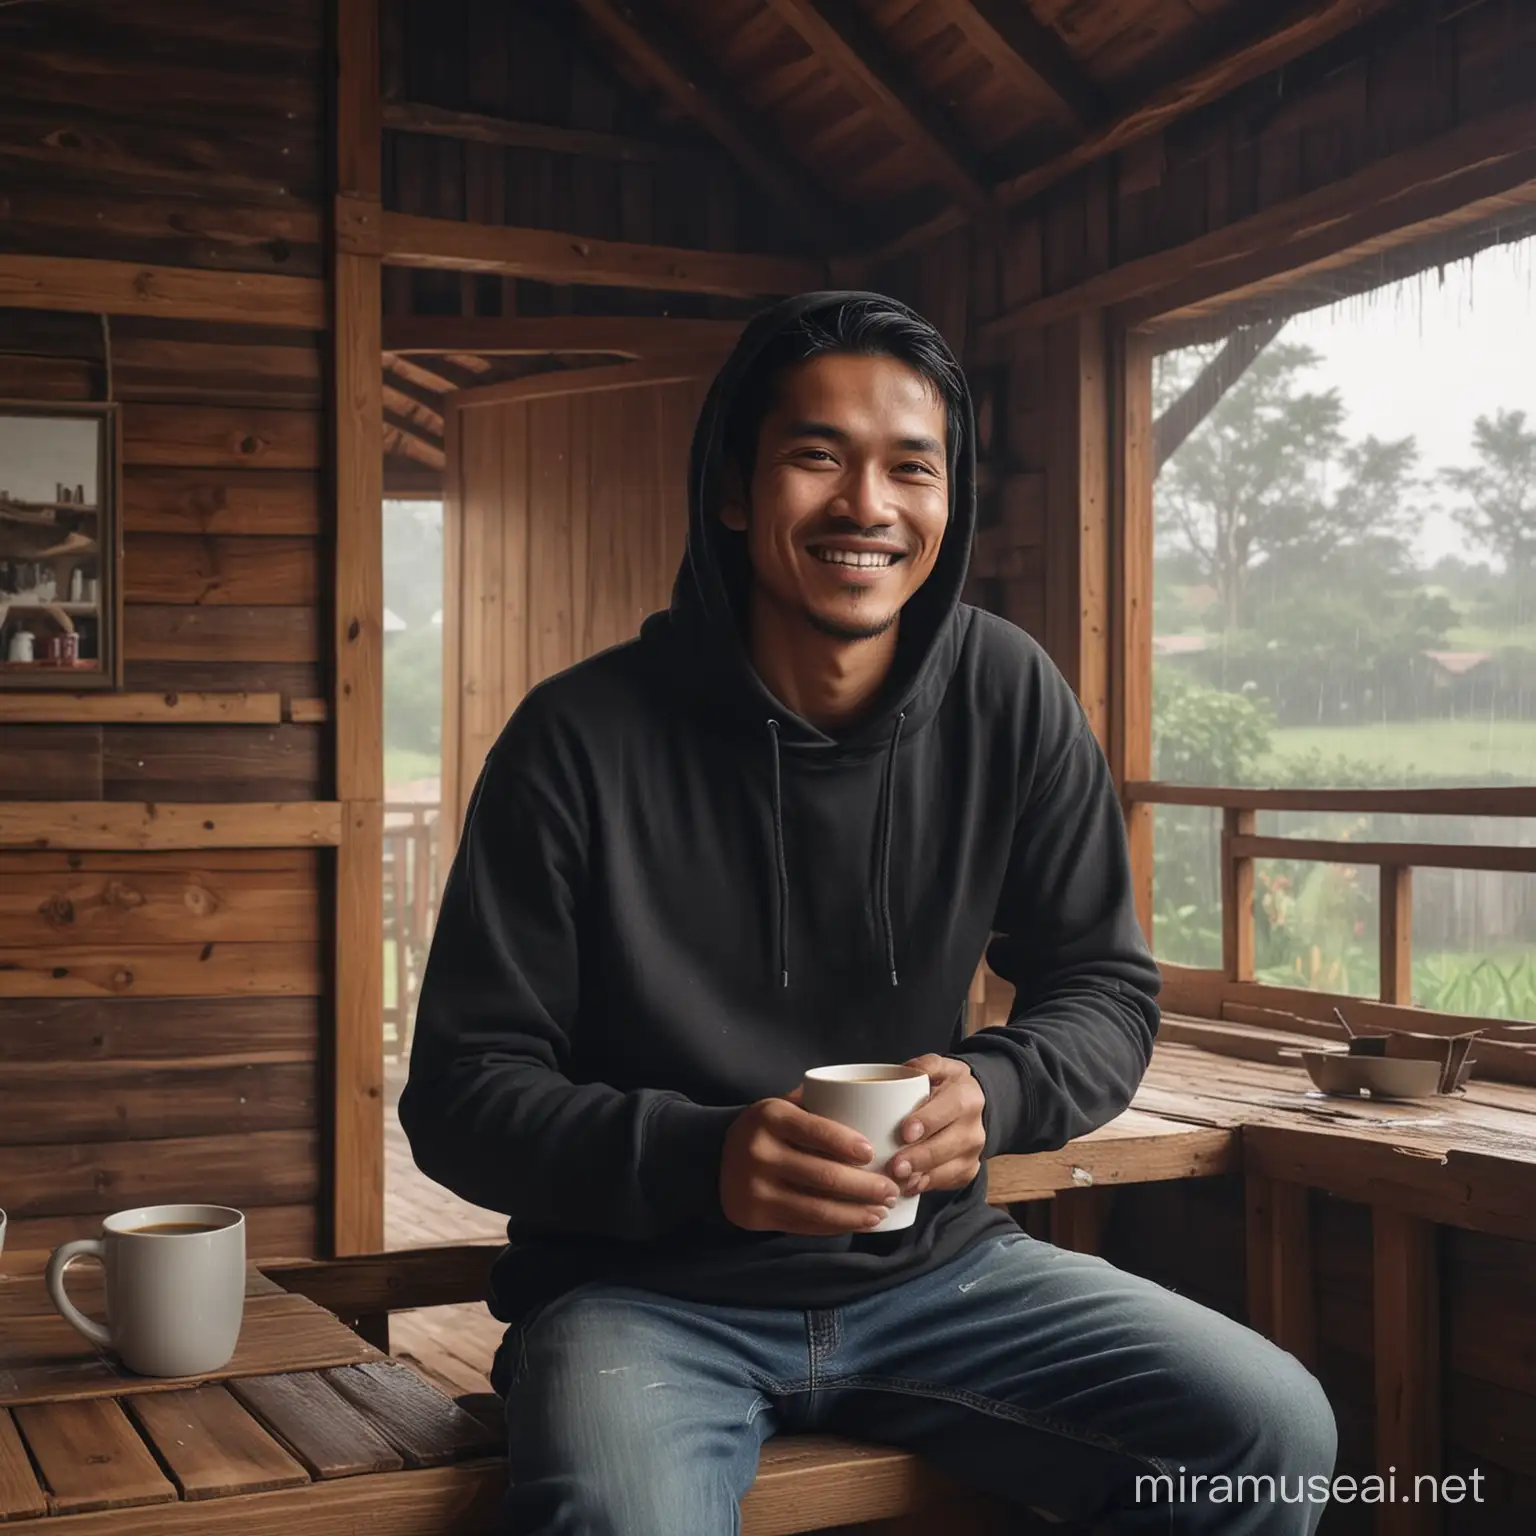 Smiling Indonesian Man Enjoying Coffee in Wooden House on Rainy Morning